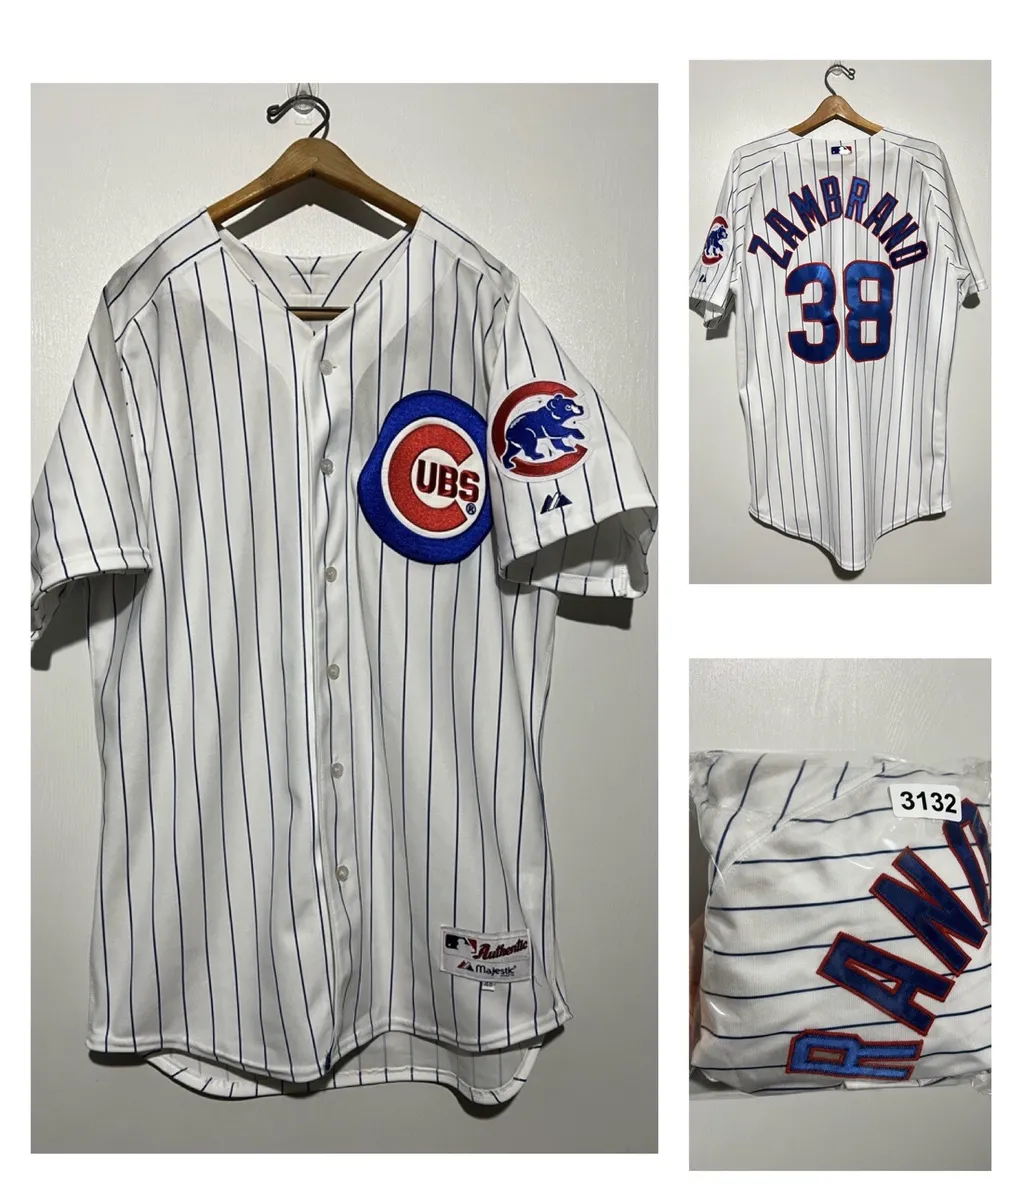 VTG Carlos Zambrano #38 Chicago Cubs Sewn Pinstriped Majestic Jersey Size 48